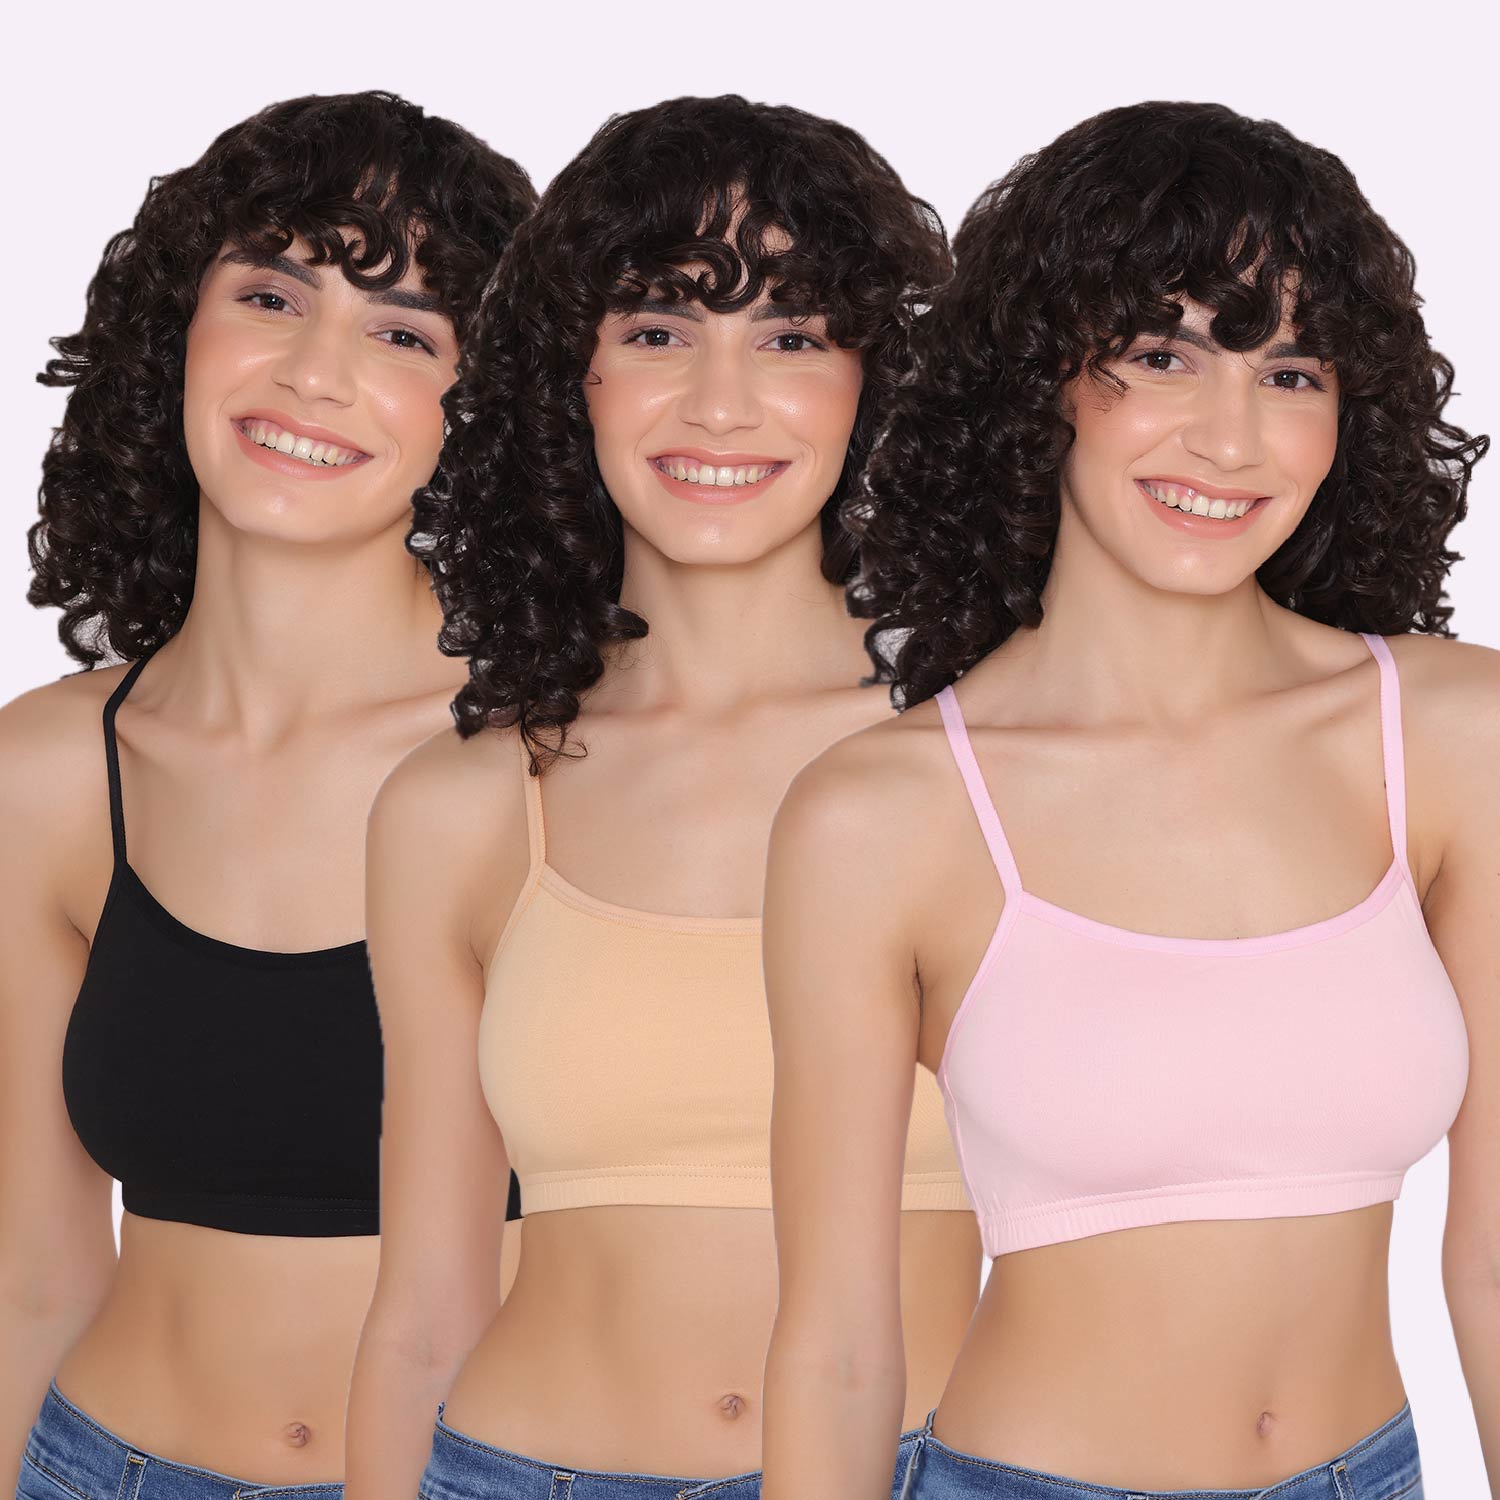 Teenager cotton Sports bras for women's in different sizes and